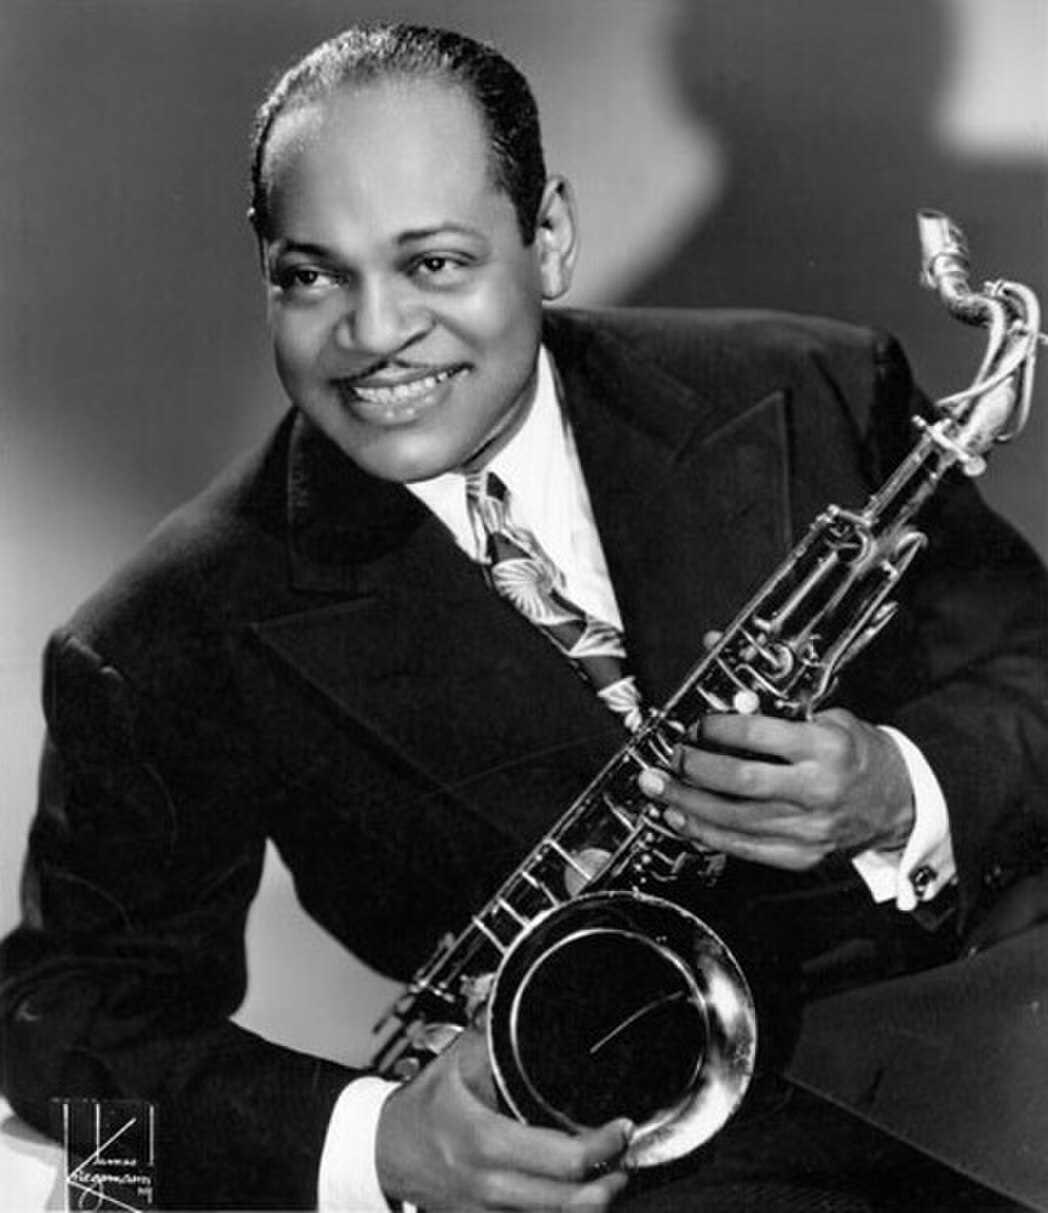 Coleman Hawkins - The Complete Albums Collection: 1957-1959